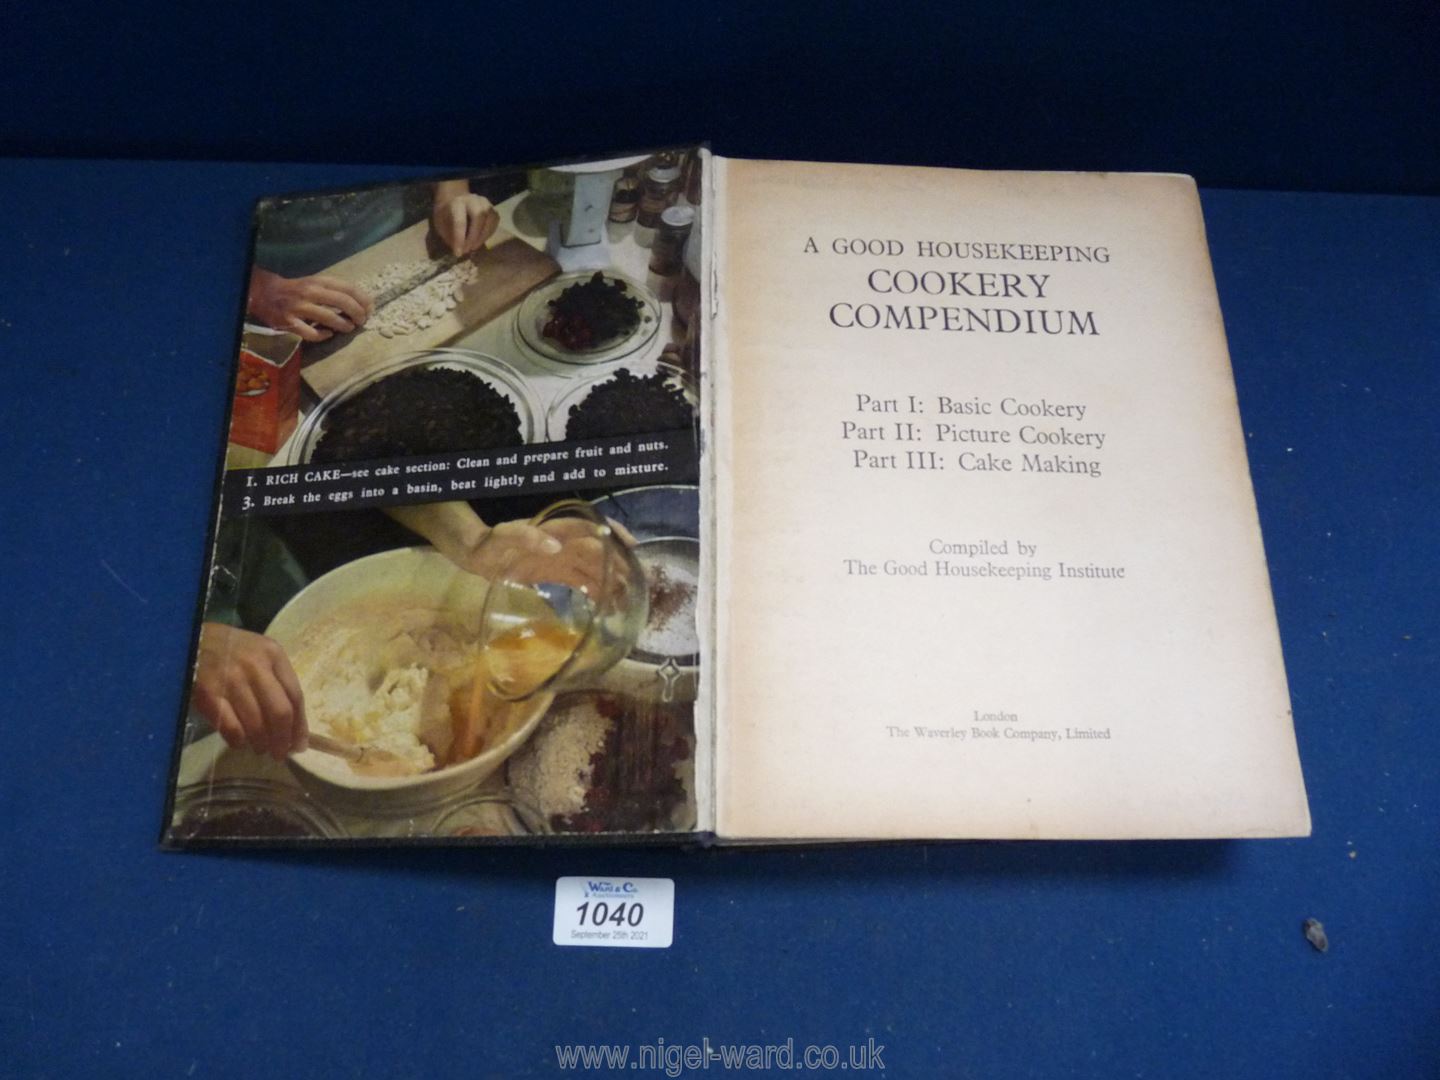 A copy of 'A Good Housekeeping Cookery Compendium', with some annotations.